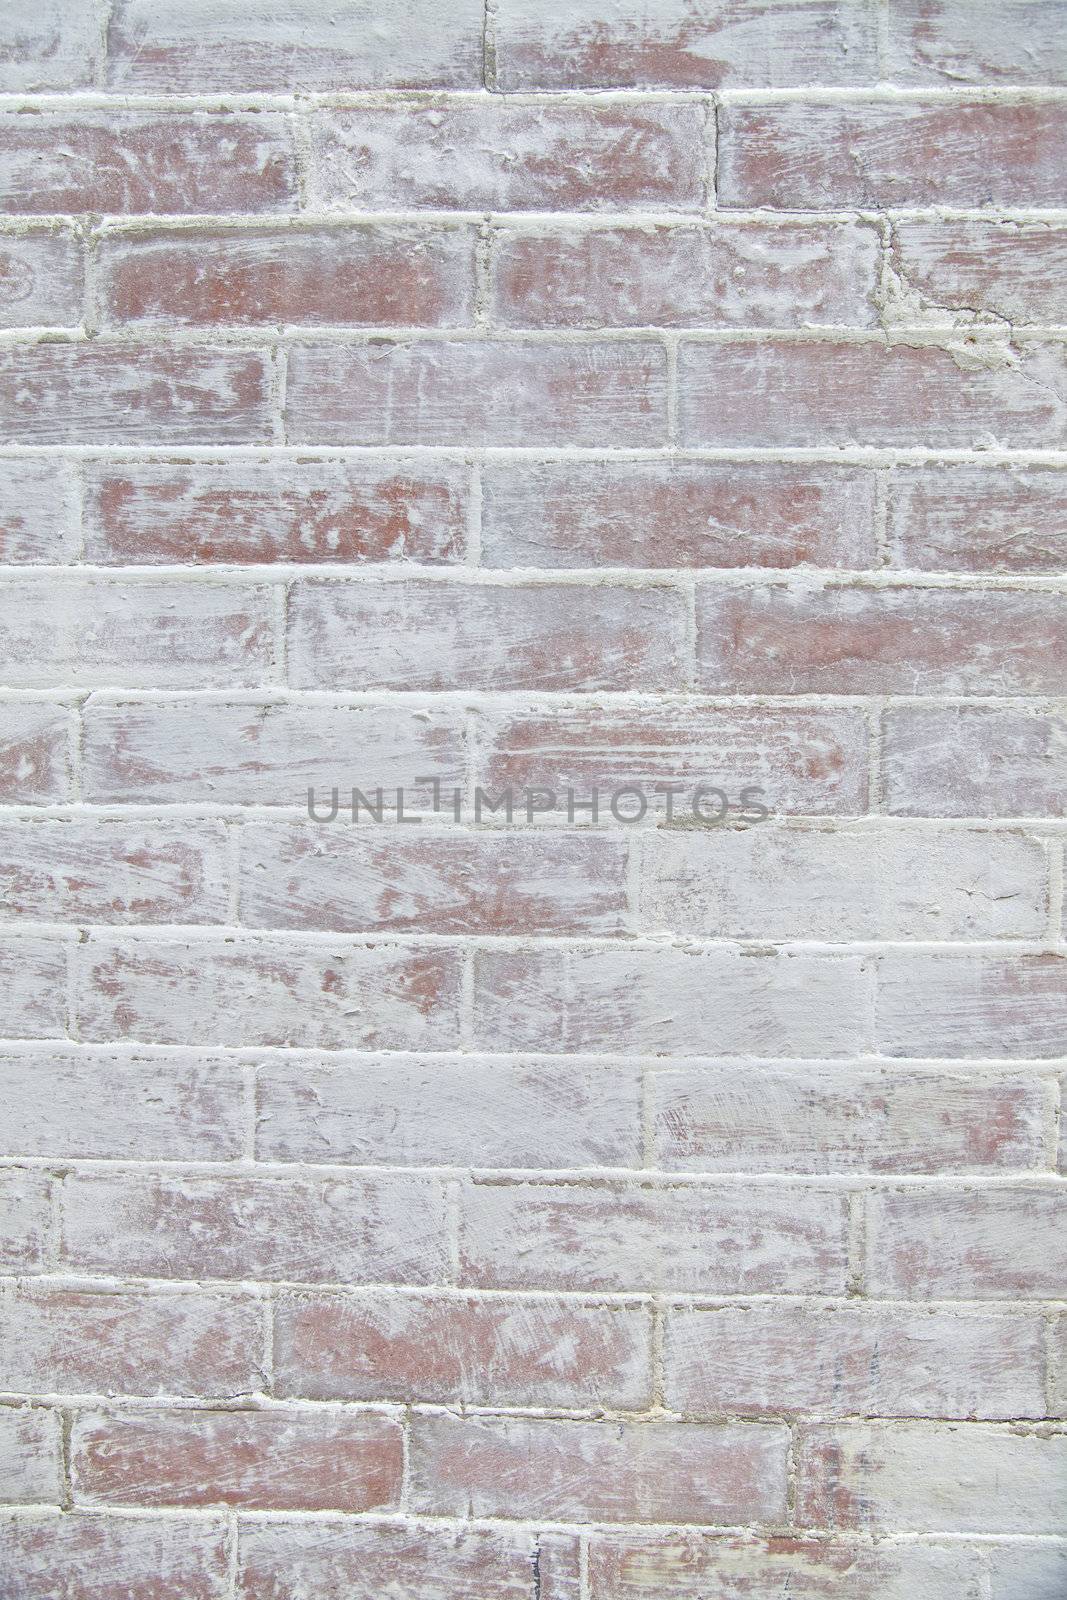 Weathered white brick wall, background. Home related